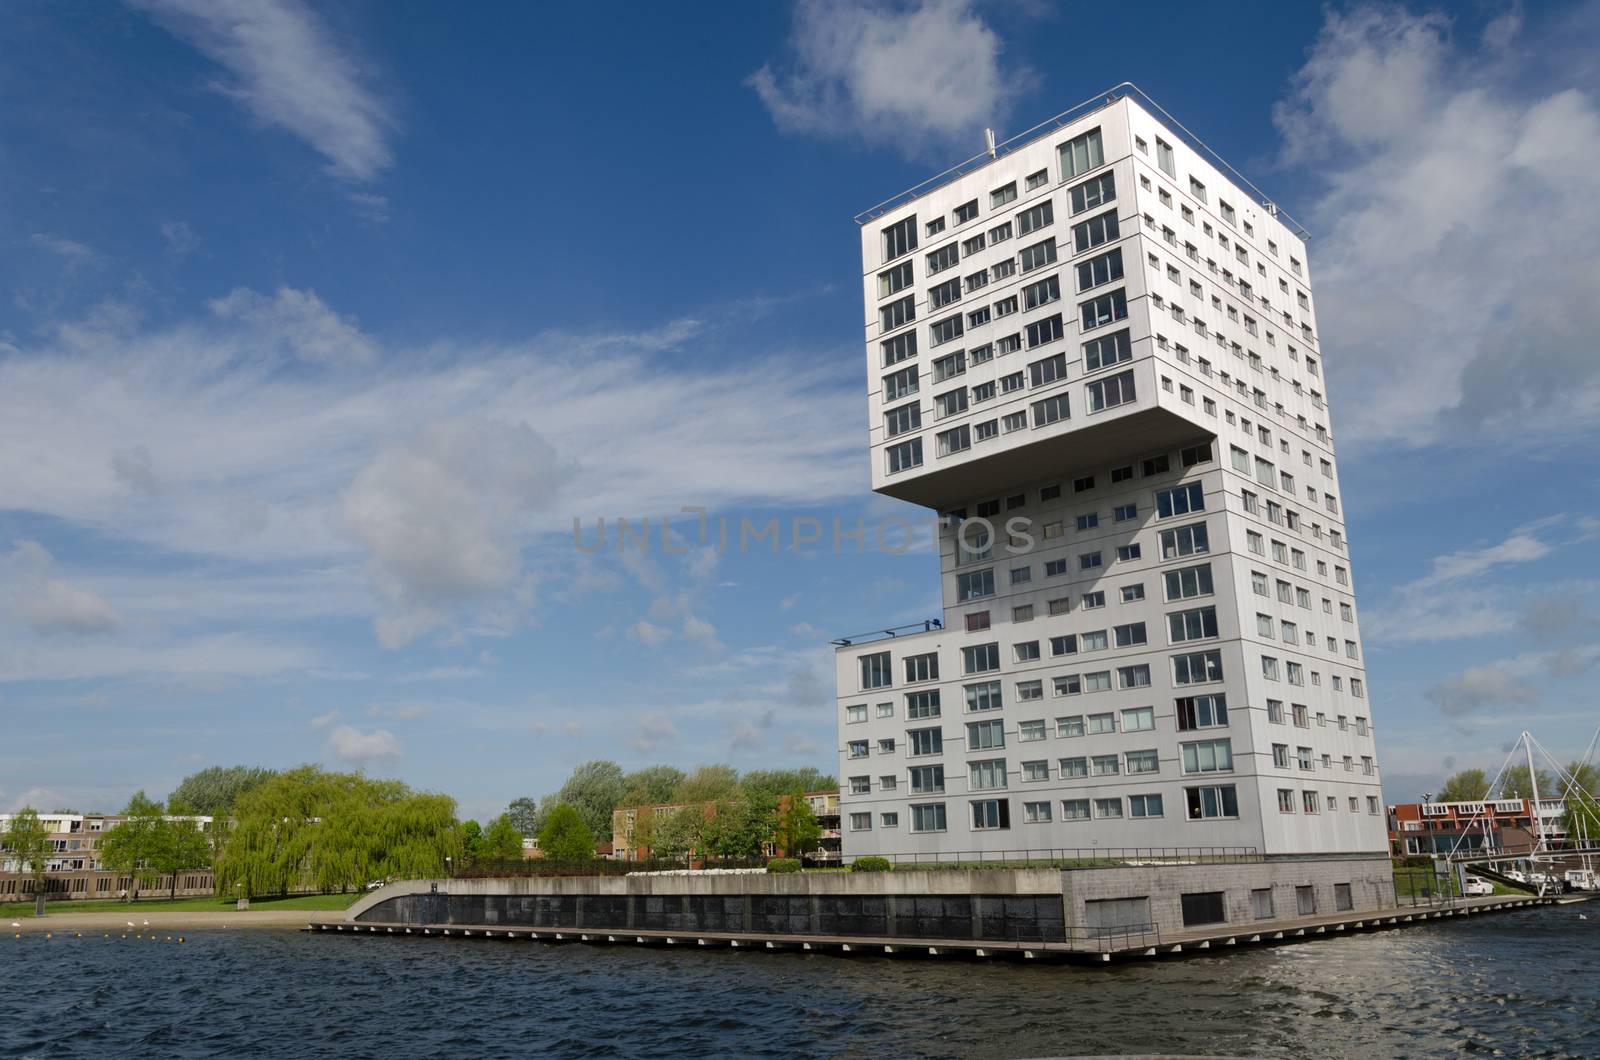 Modern apartment building at Weer water in Almere Stad by siraanamwong